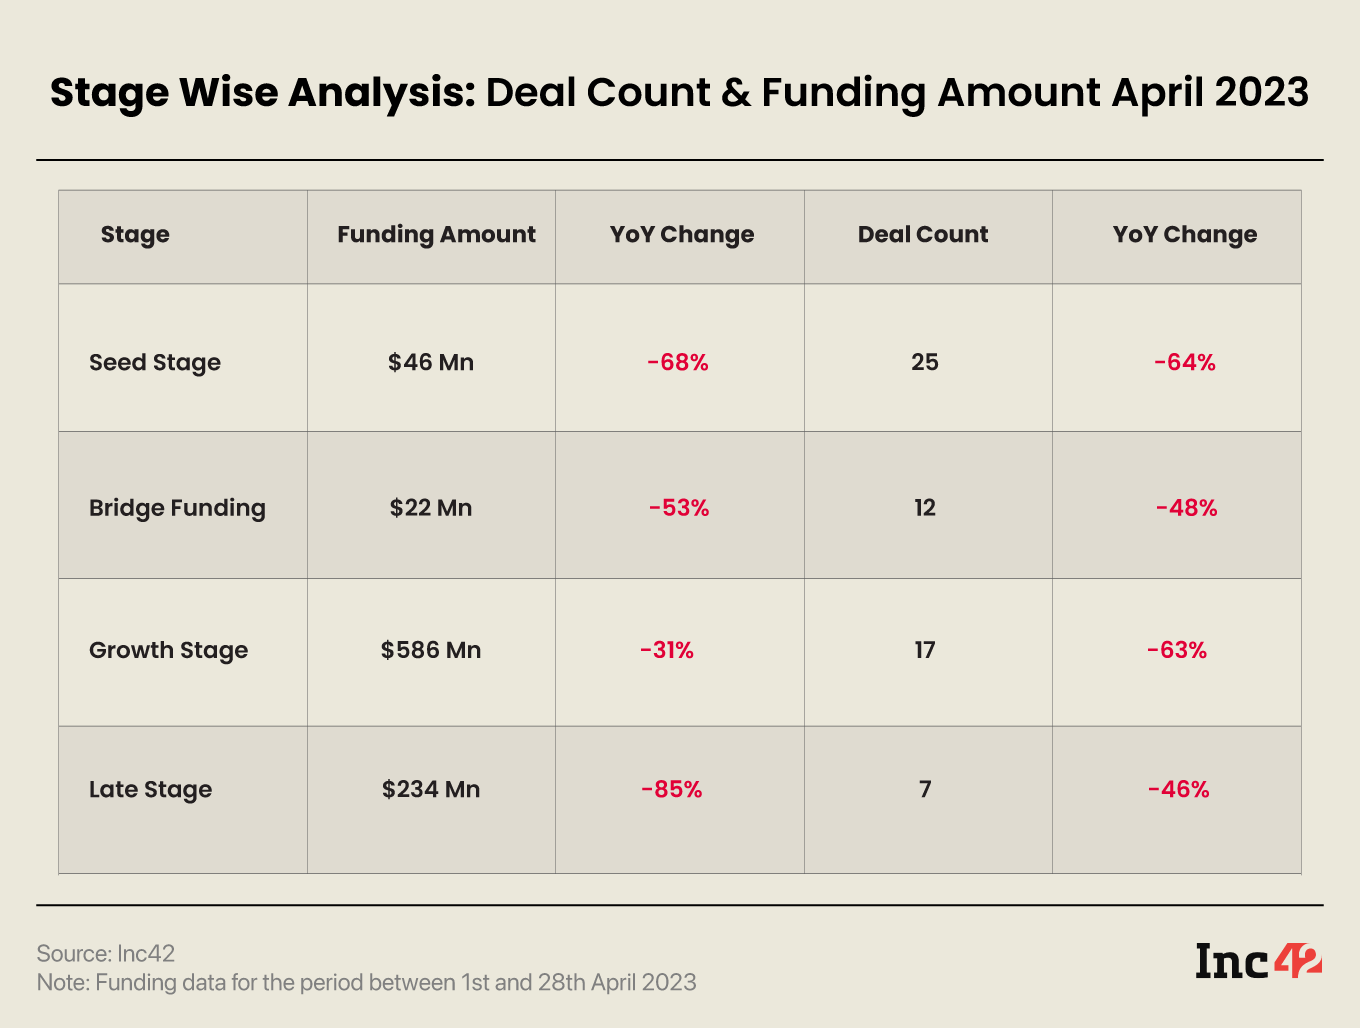 Stage-wise startup funding analysis